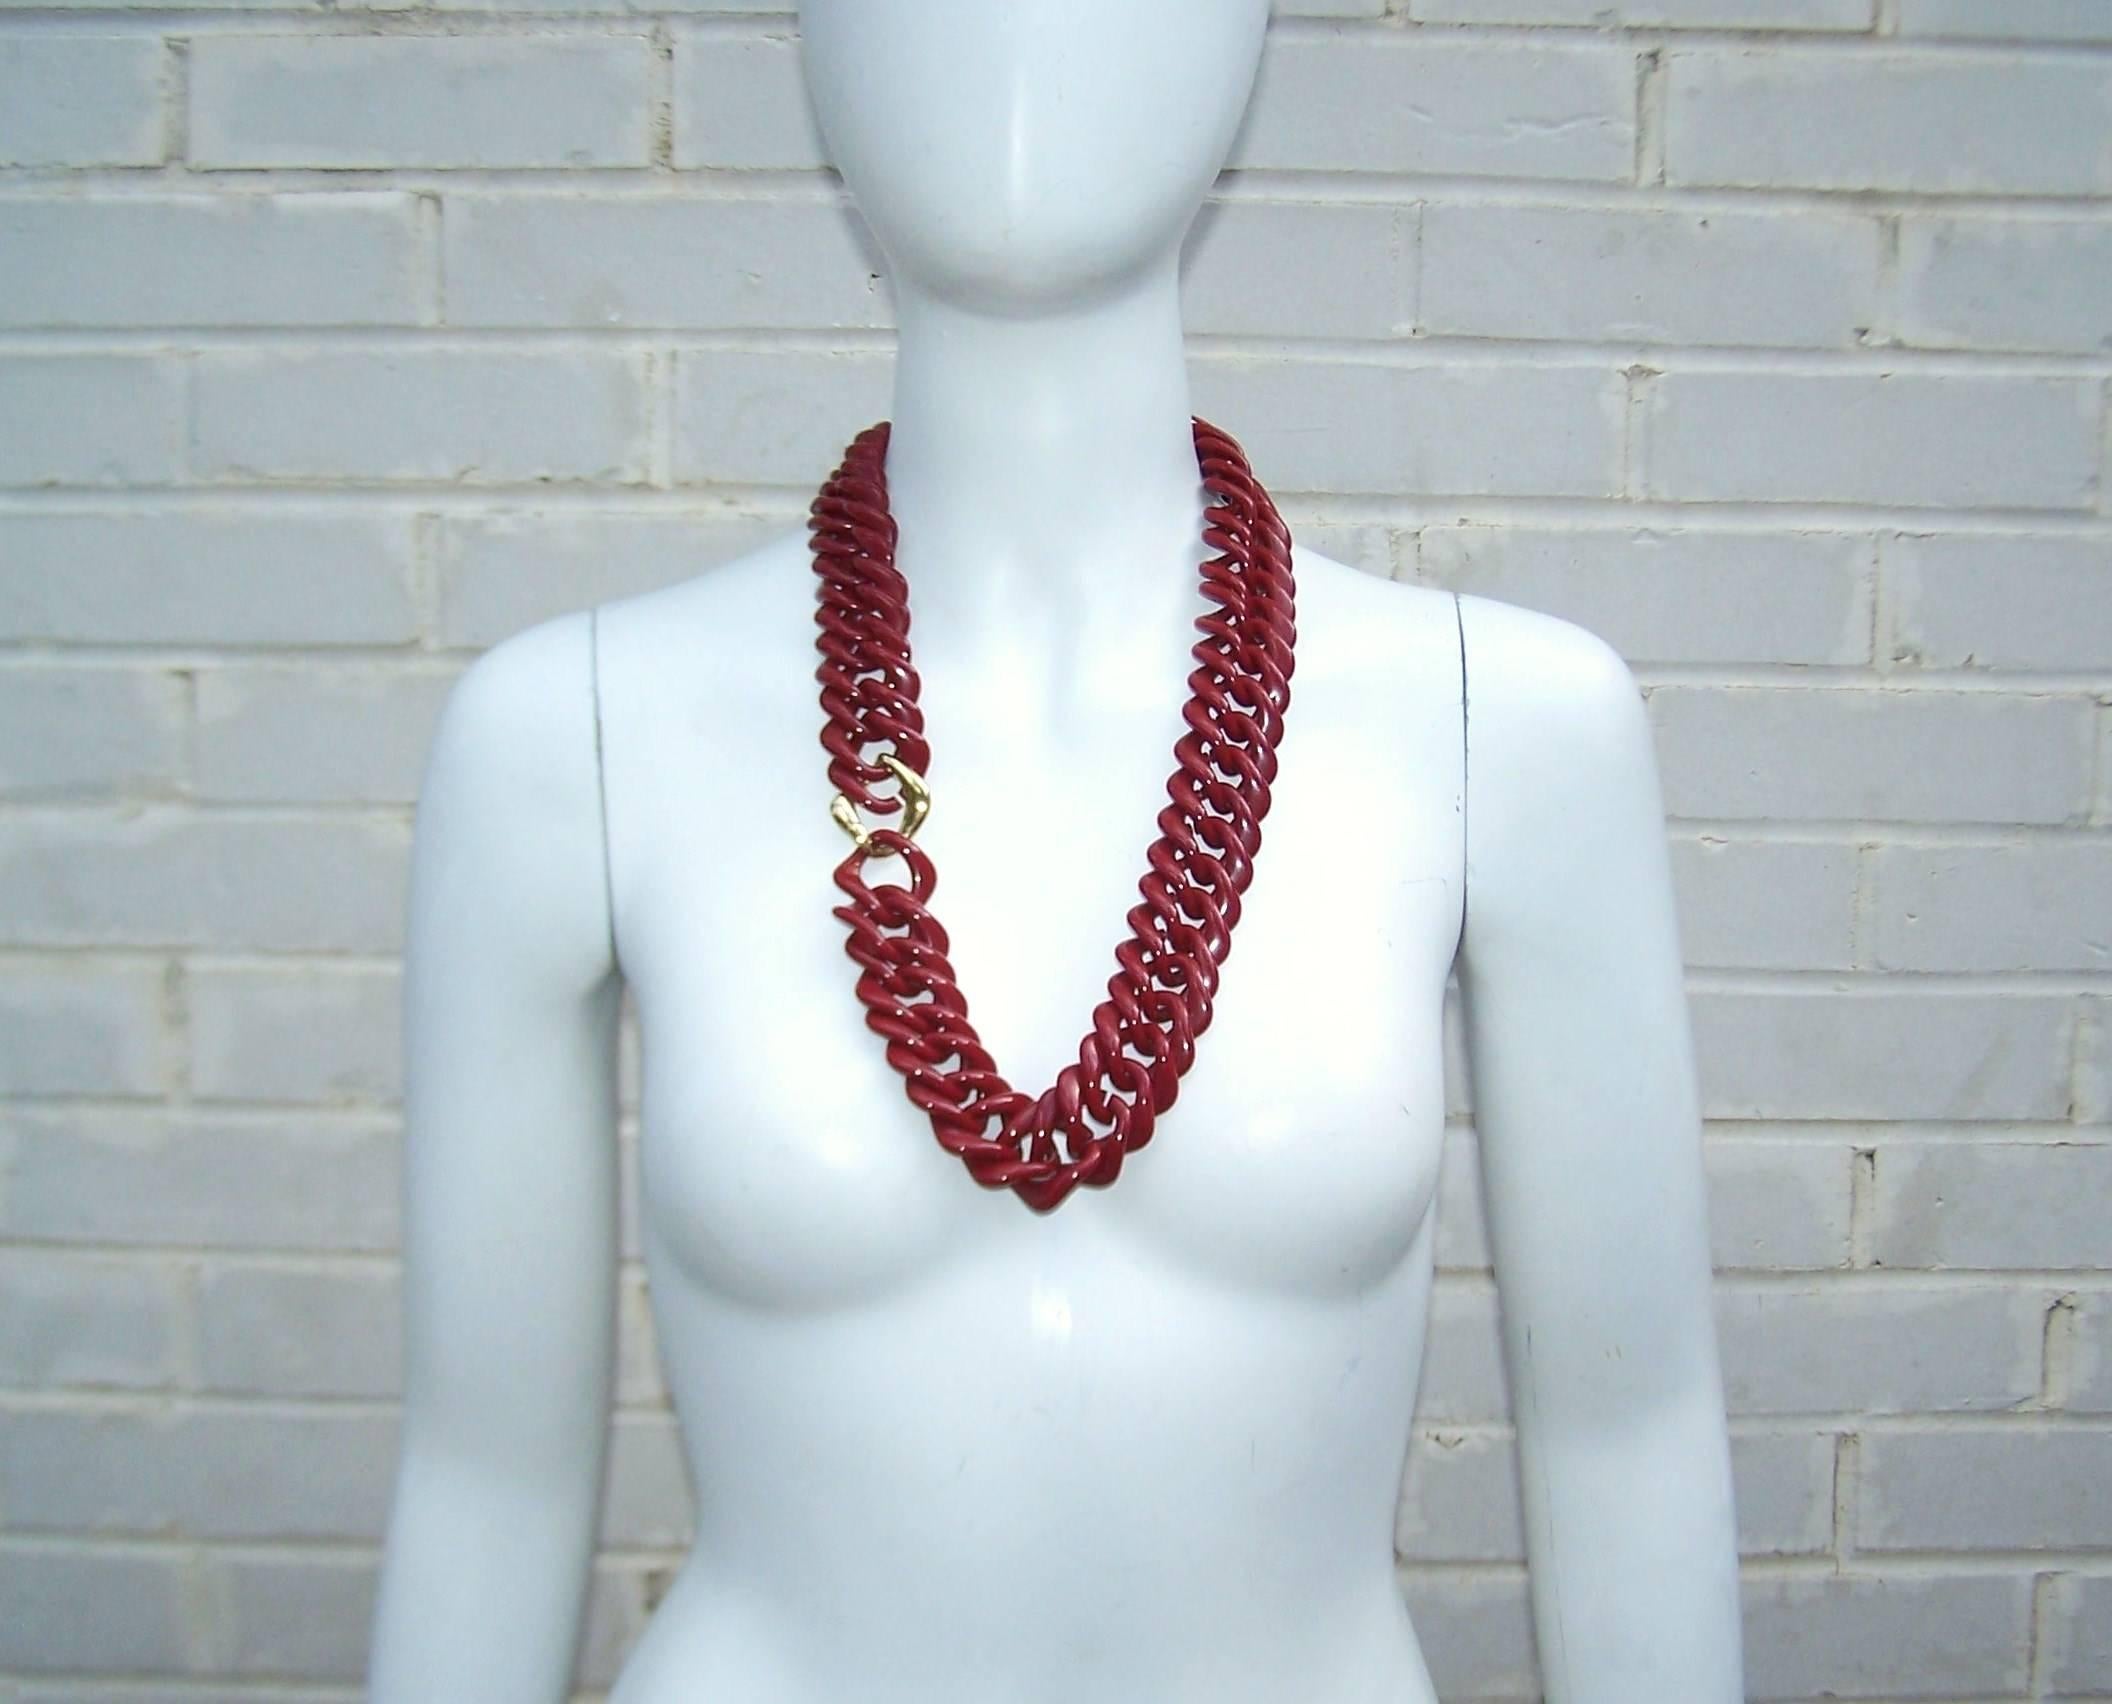 Transform your look with this vintage Trifari necklace.  The chunky chain has a weighty appearance though it is deceivingly light and comfortable for all day wear.  The sinewy style is formed by interlocking square plastic links in a dark burgundy